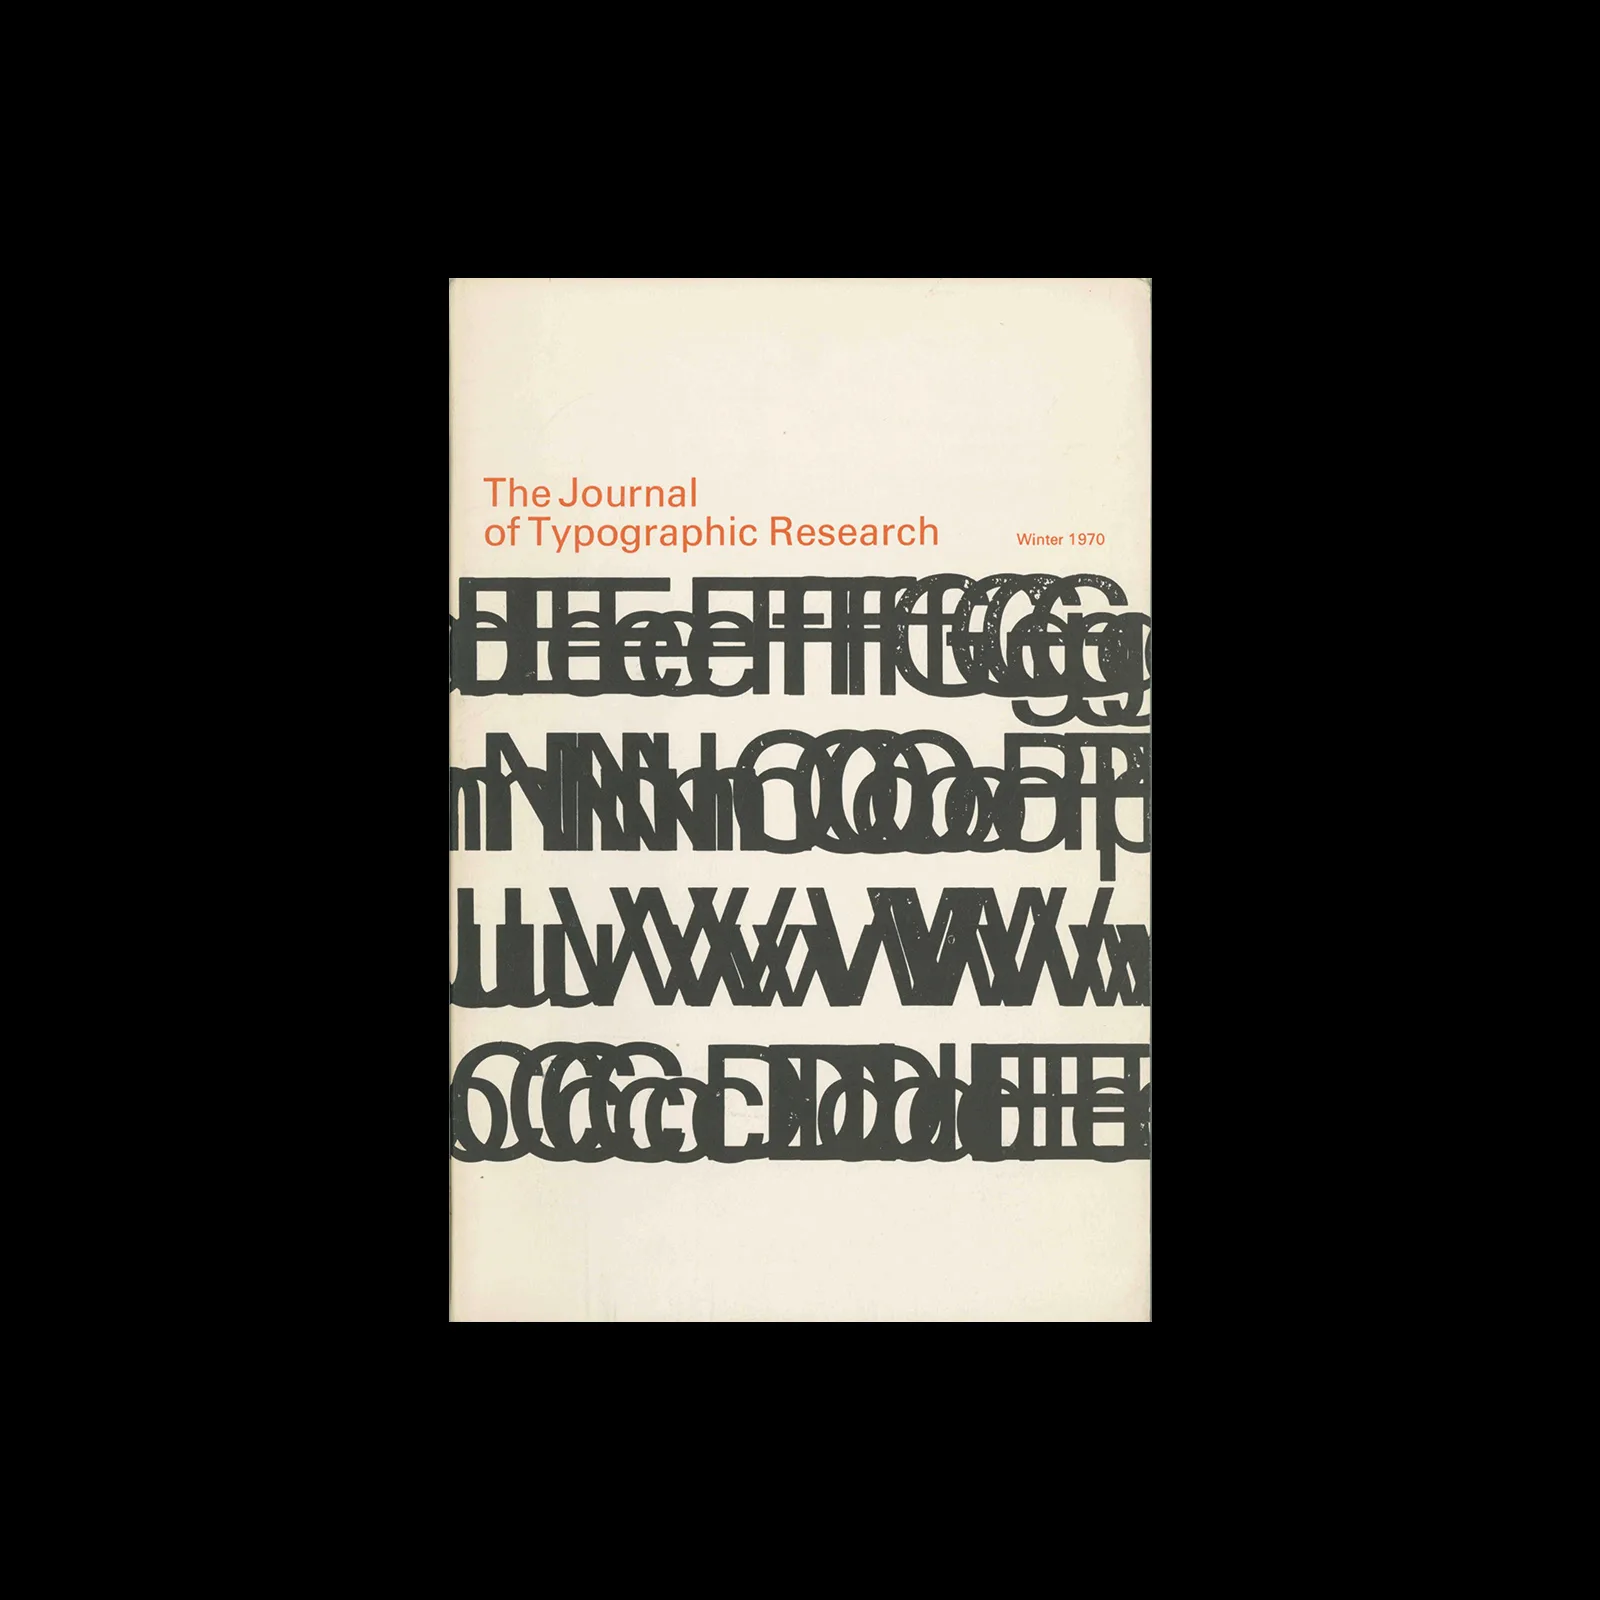 Visible Language (The Journal of Typographic Research, Vol 04, 01, Winter 1970